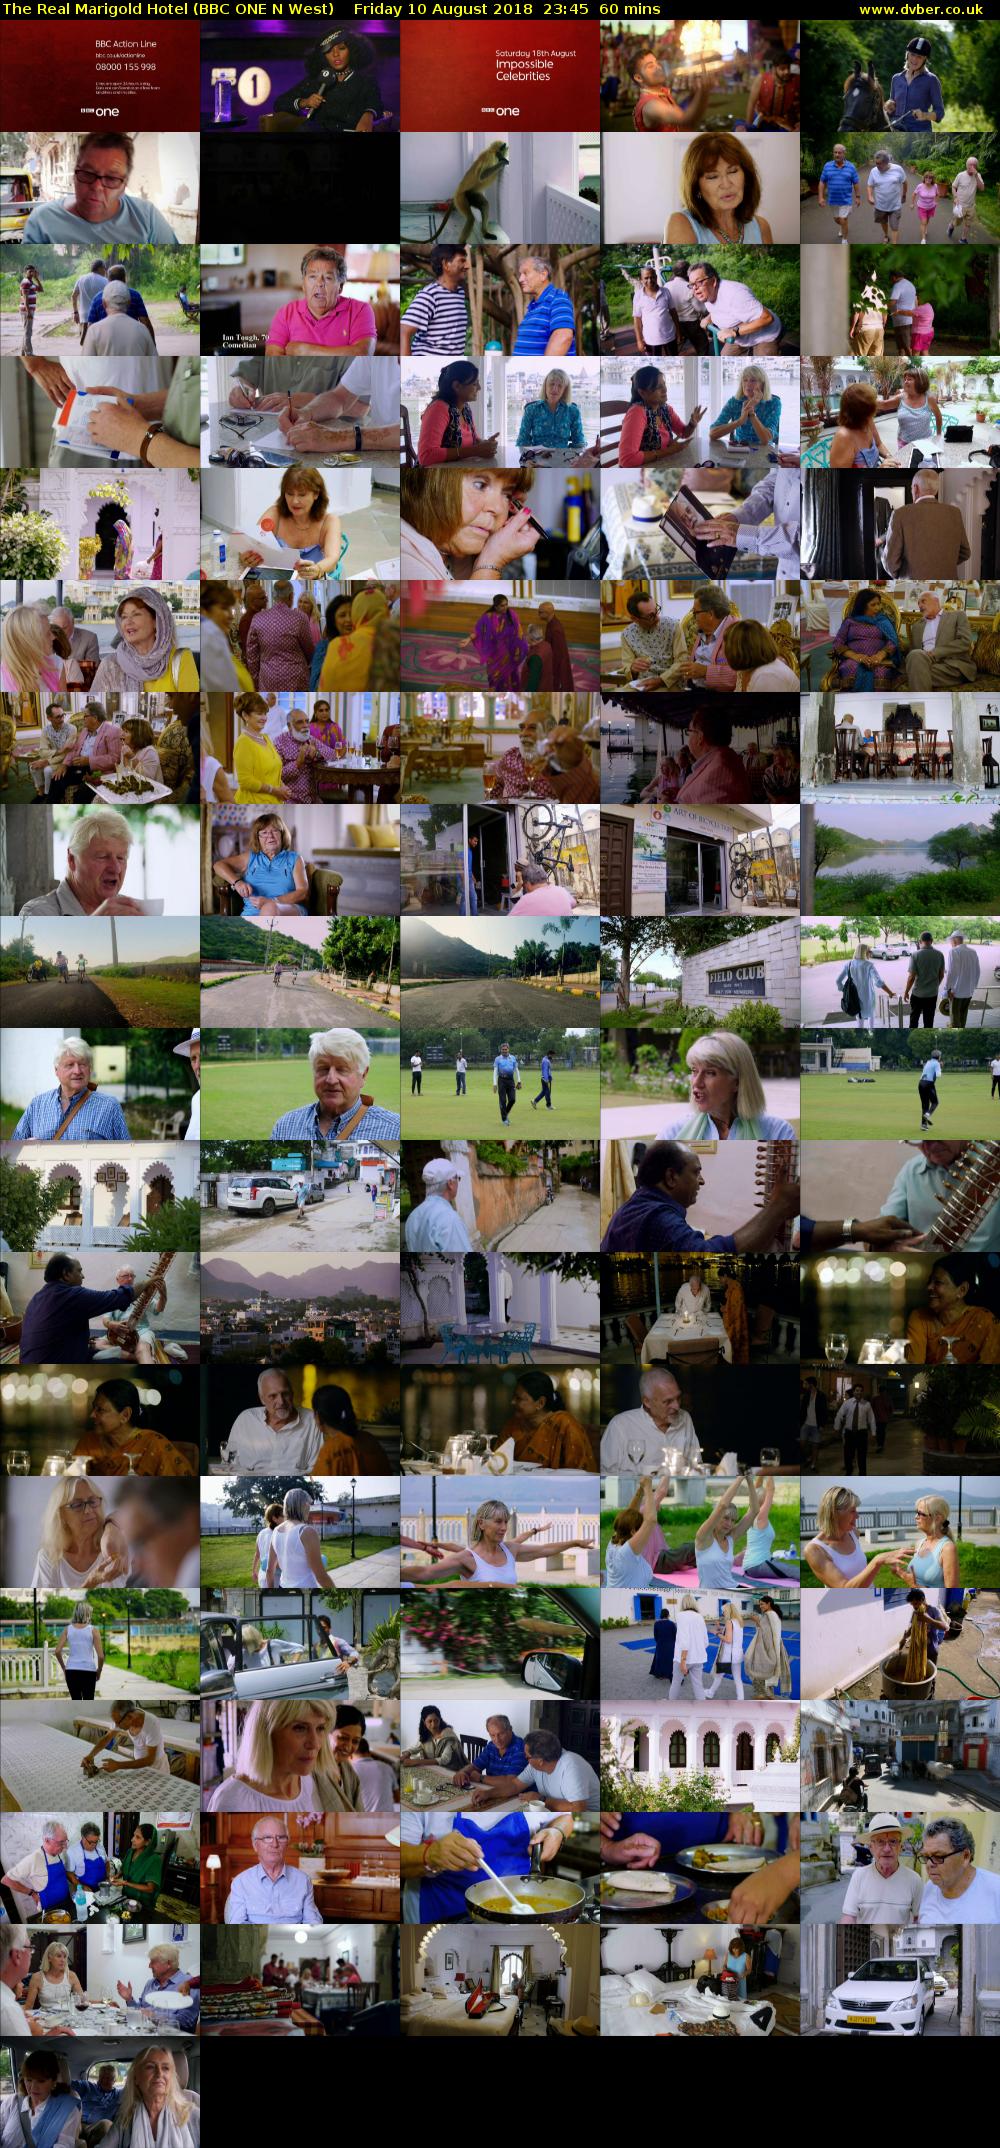 The Real Marigold Hotel (BBC ONE N West) Friday 10 August 2018 23:45 - 00:45